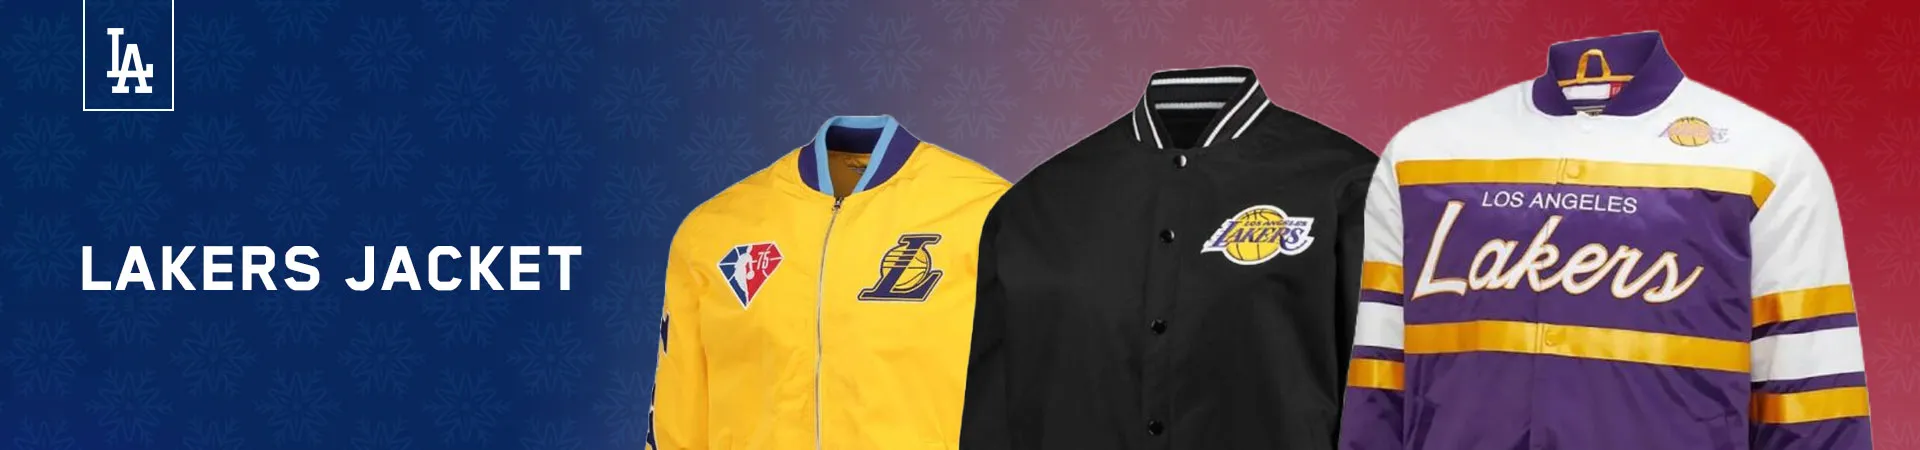 Lakers jacket Banner